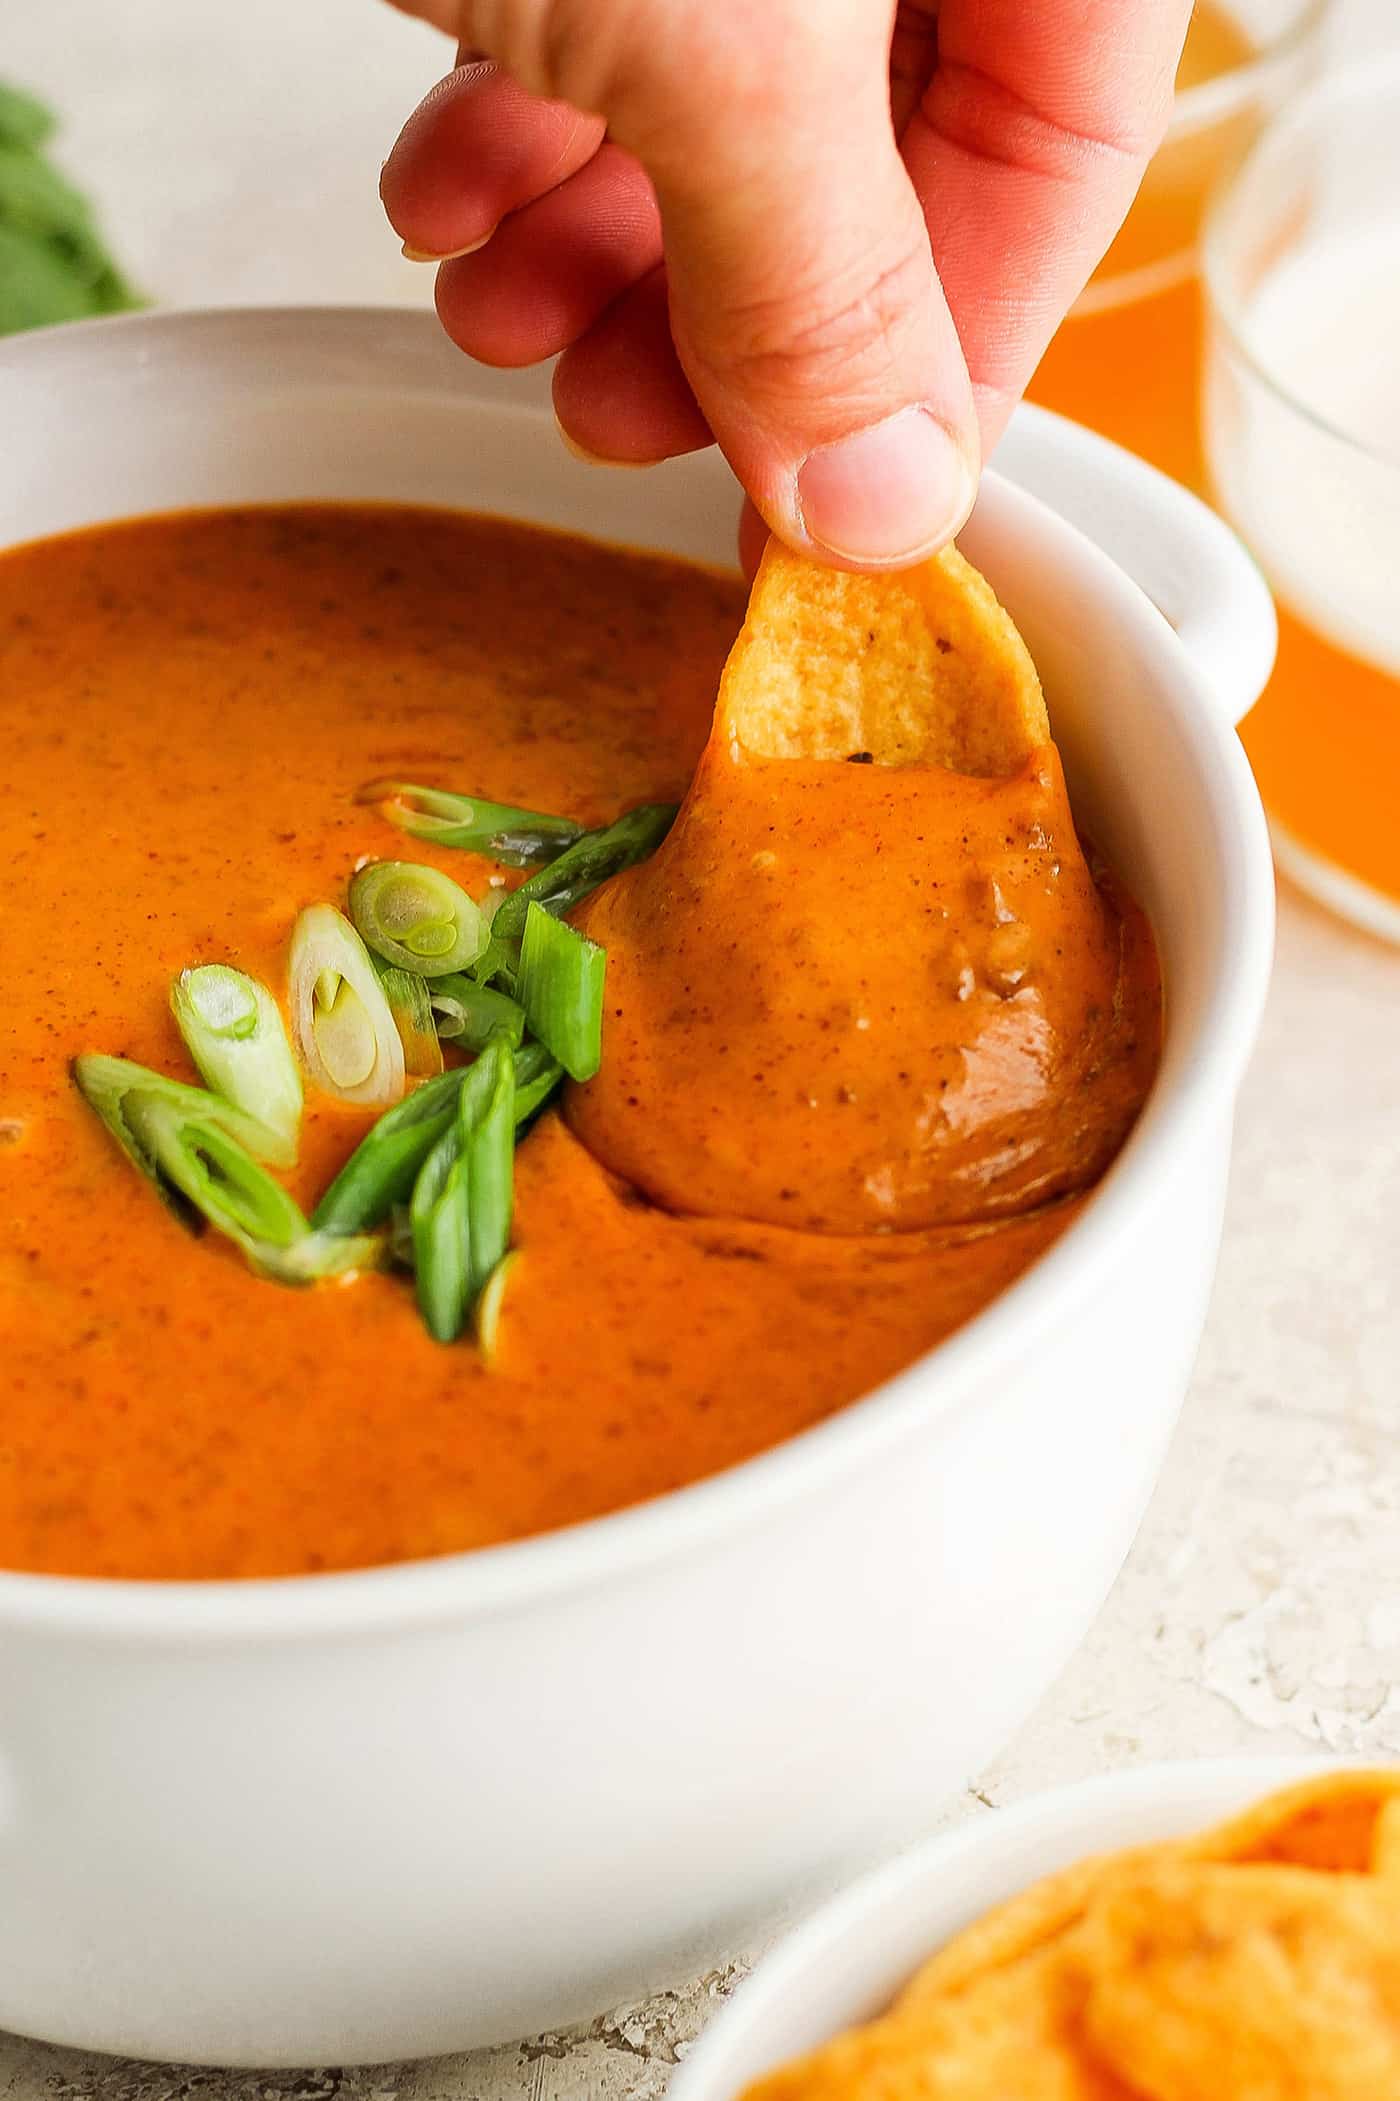 A hand dips a chip into a bowl of chili cheese dip.